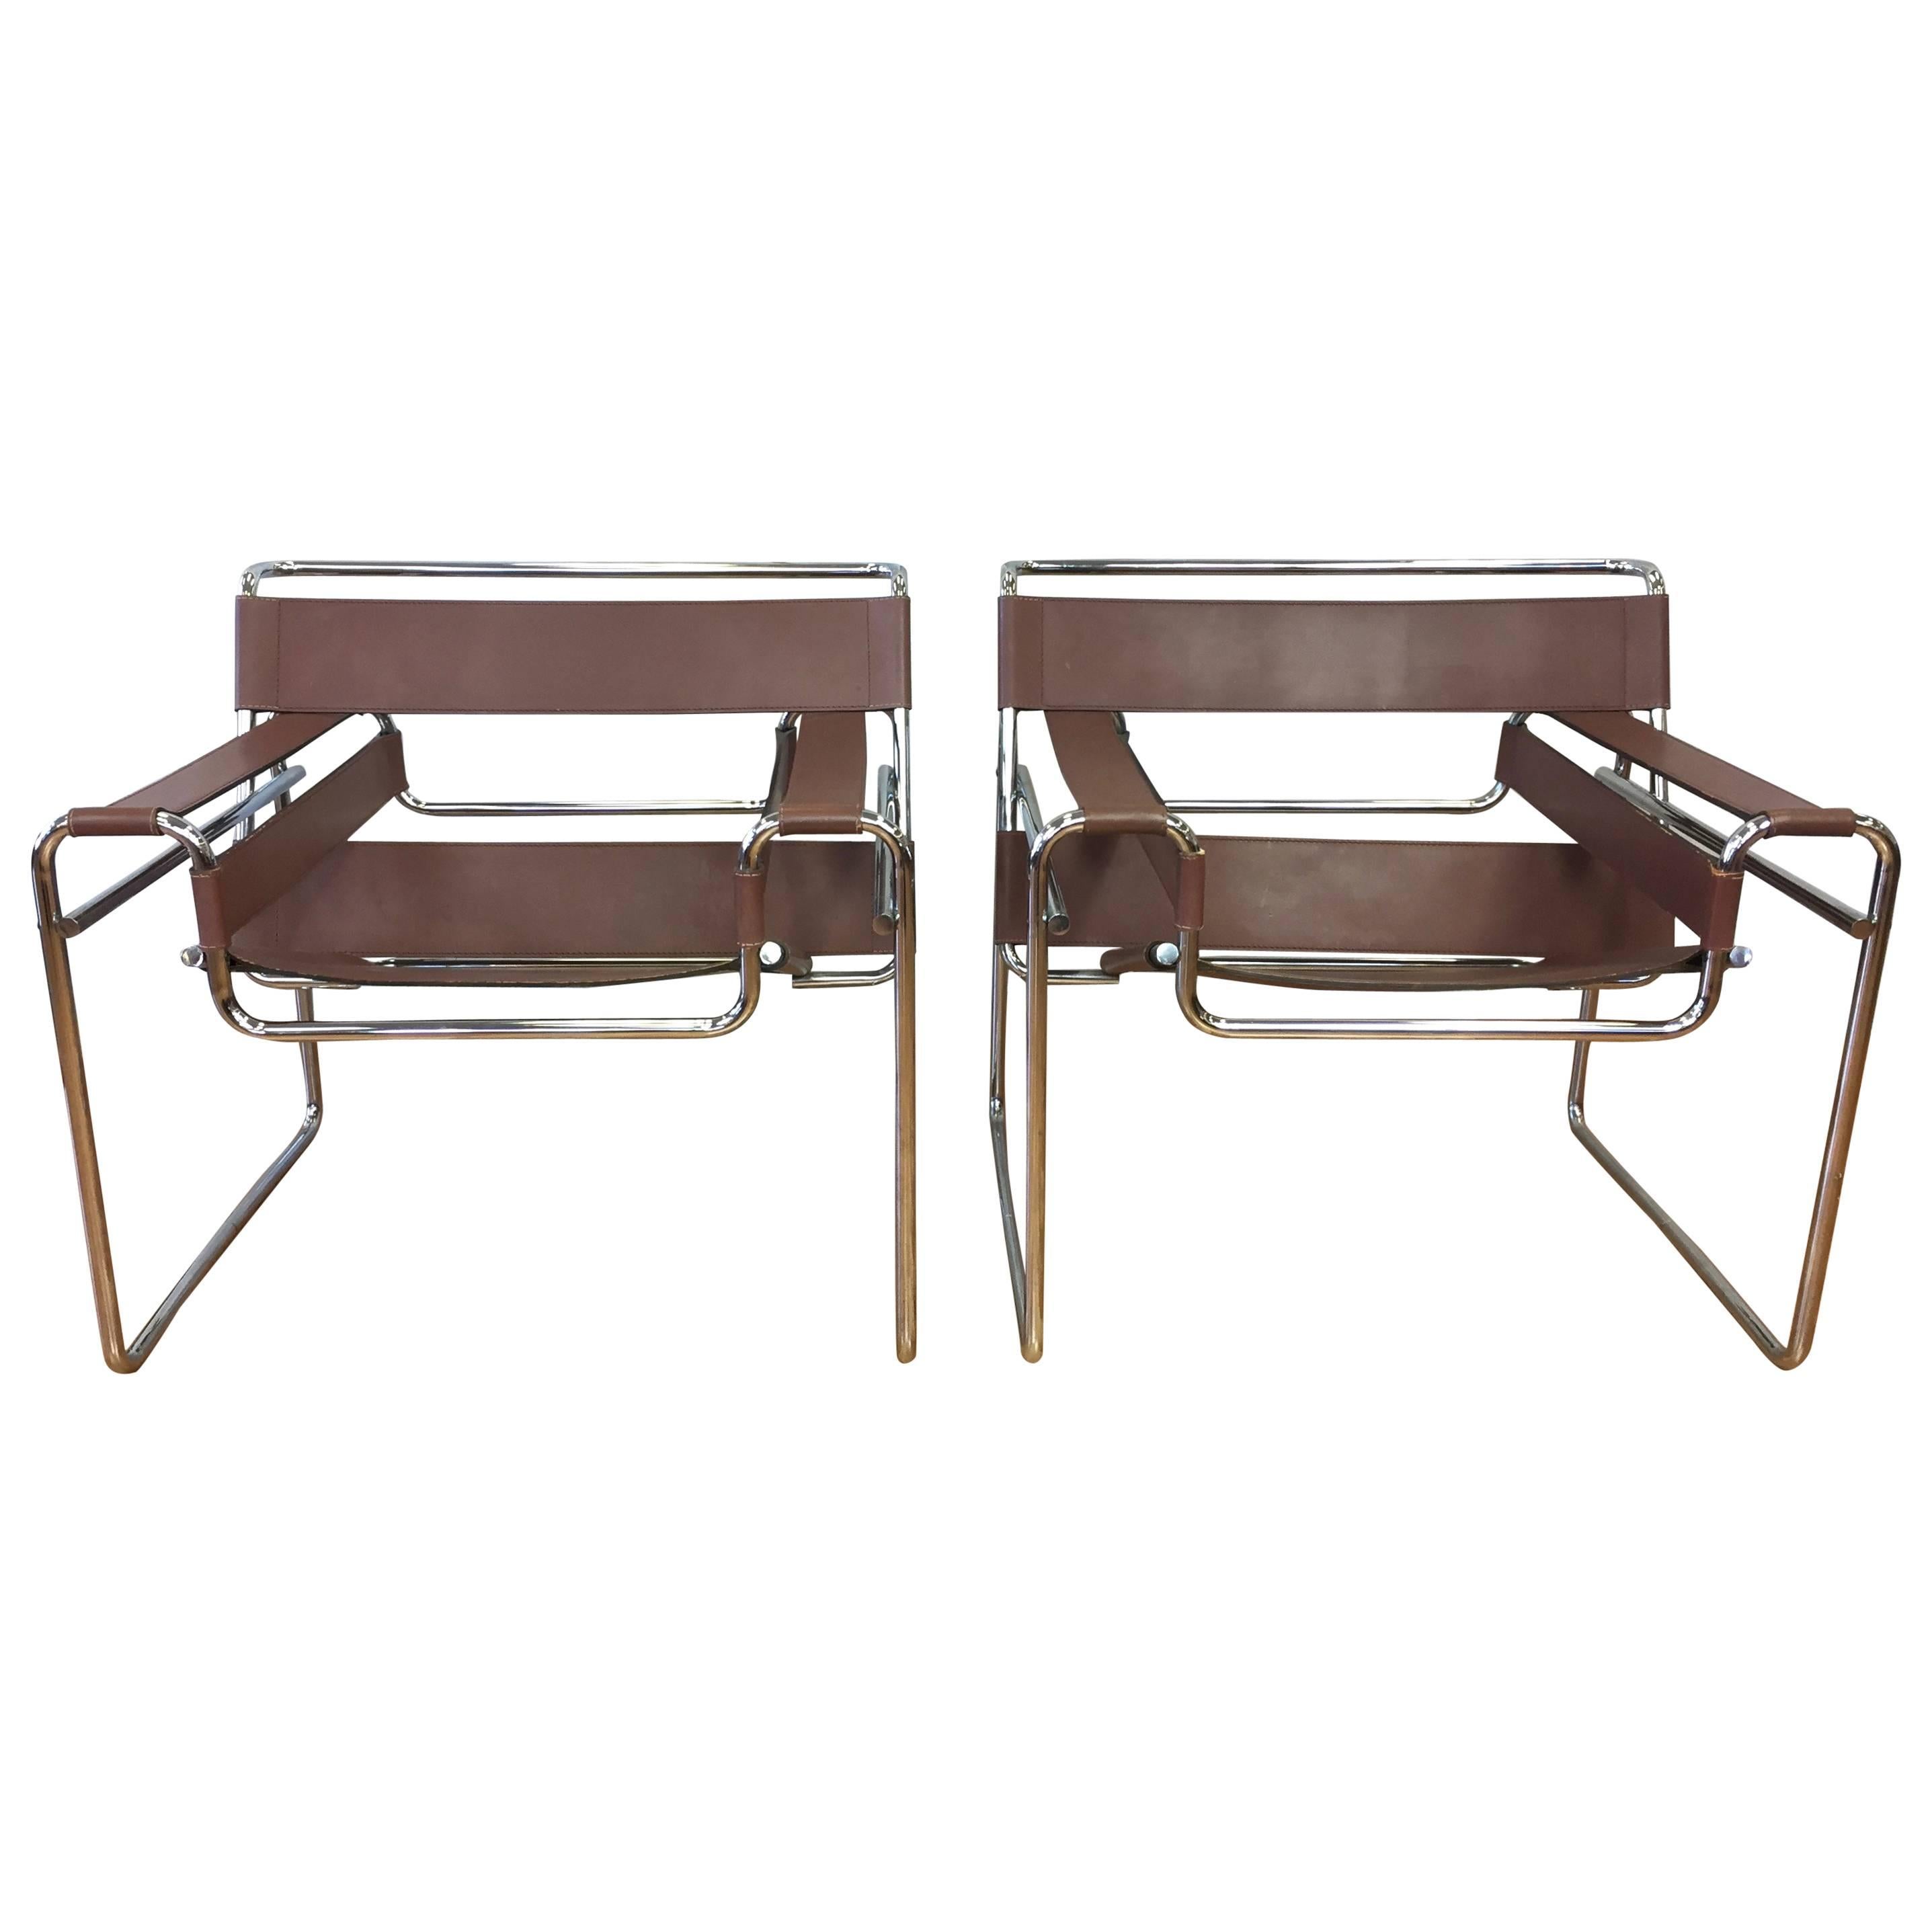 Pair of Marcel Breuer “Wassily” Chairs by Gavina for Knoll